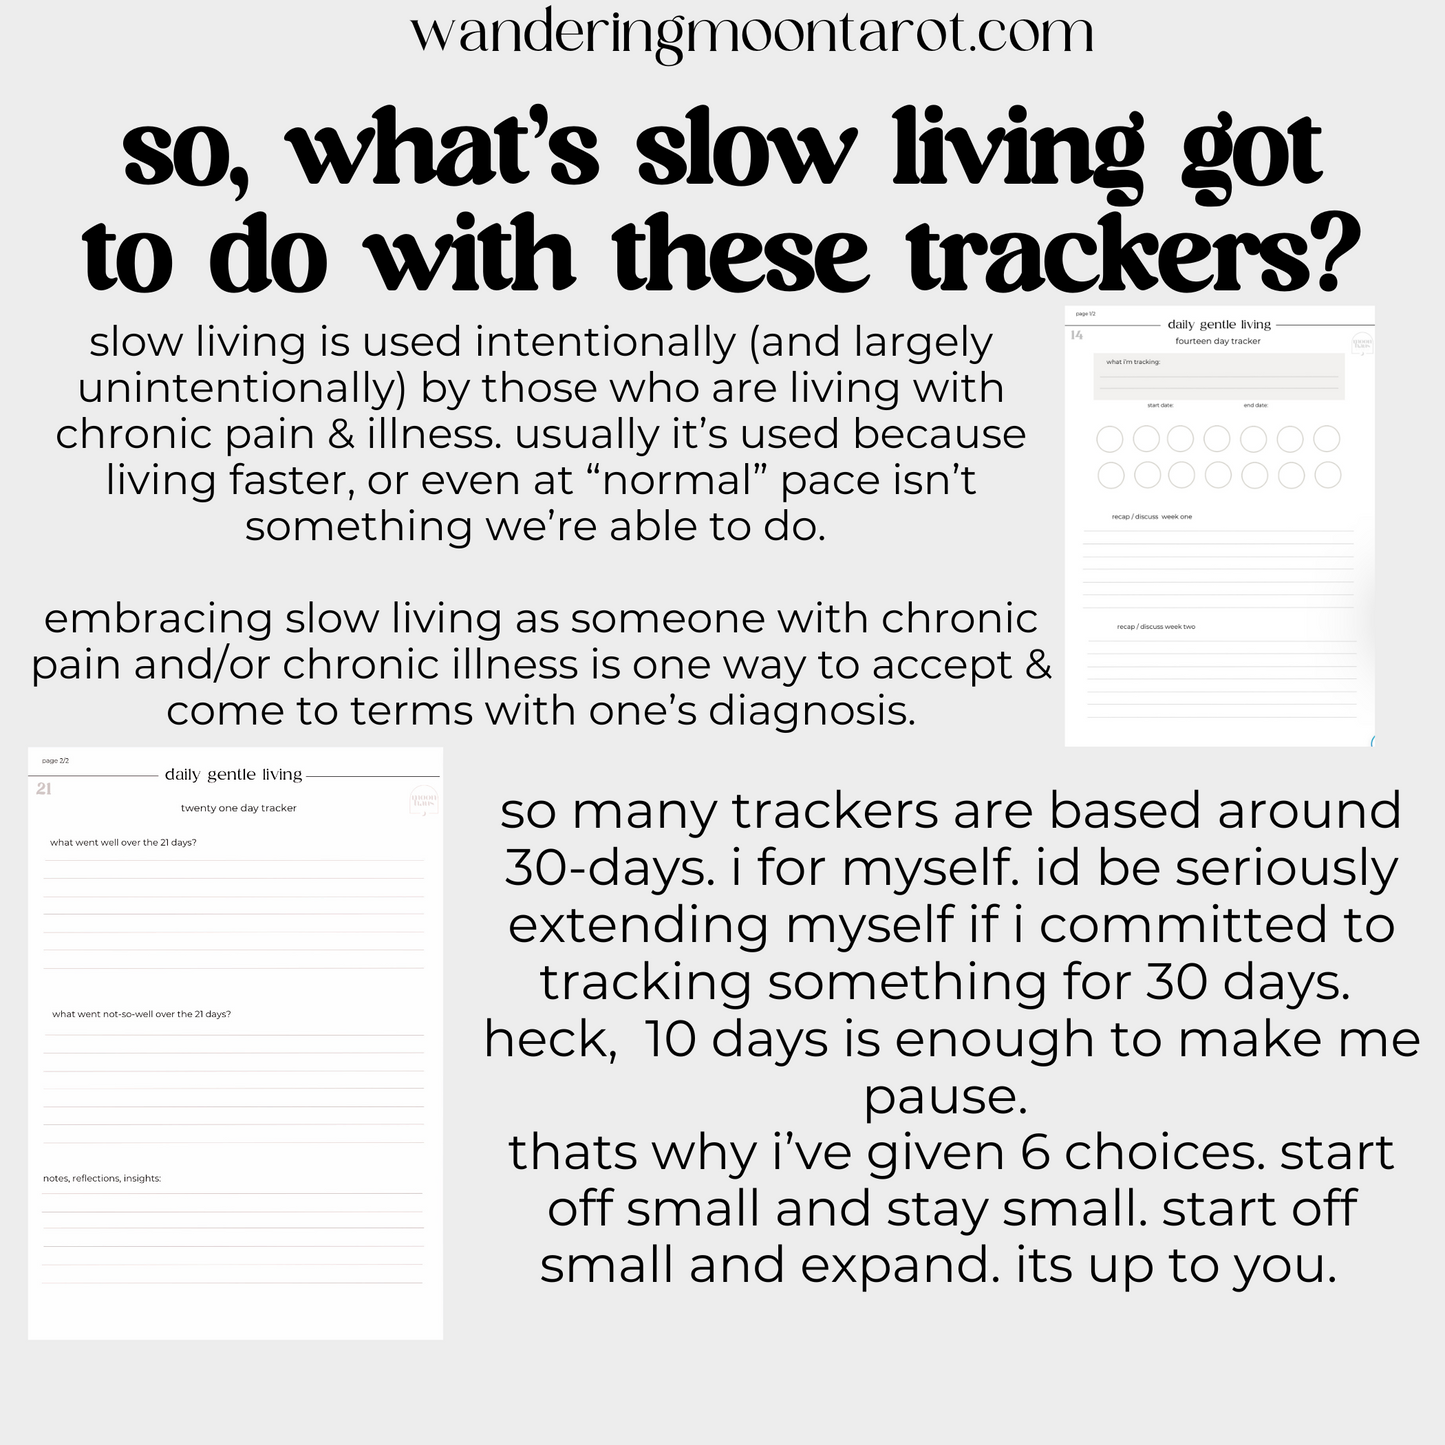 tracker pages for chronic pain & illness | spoonie journal slow living | PDF